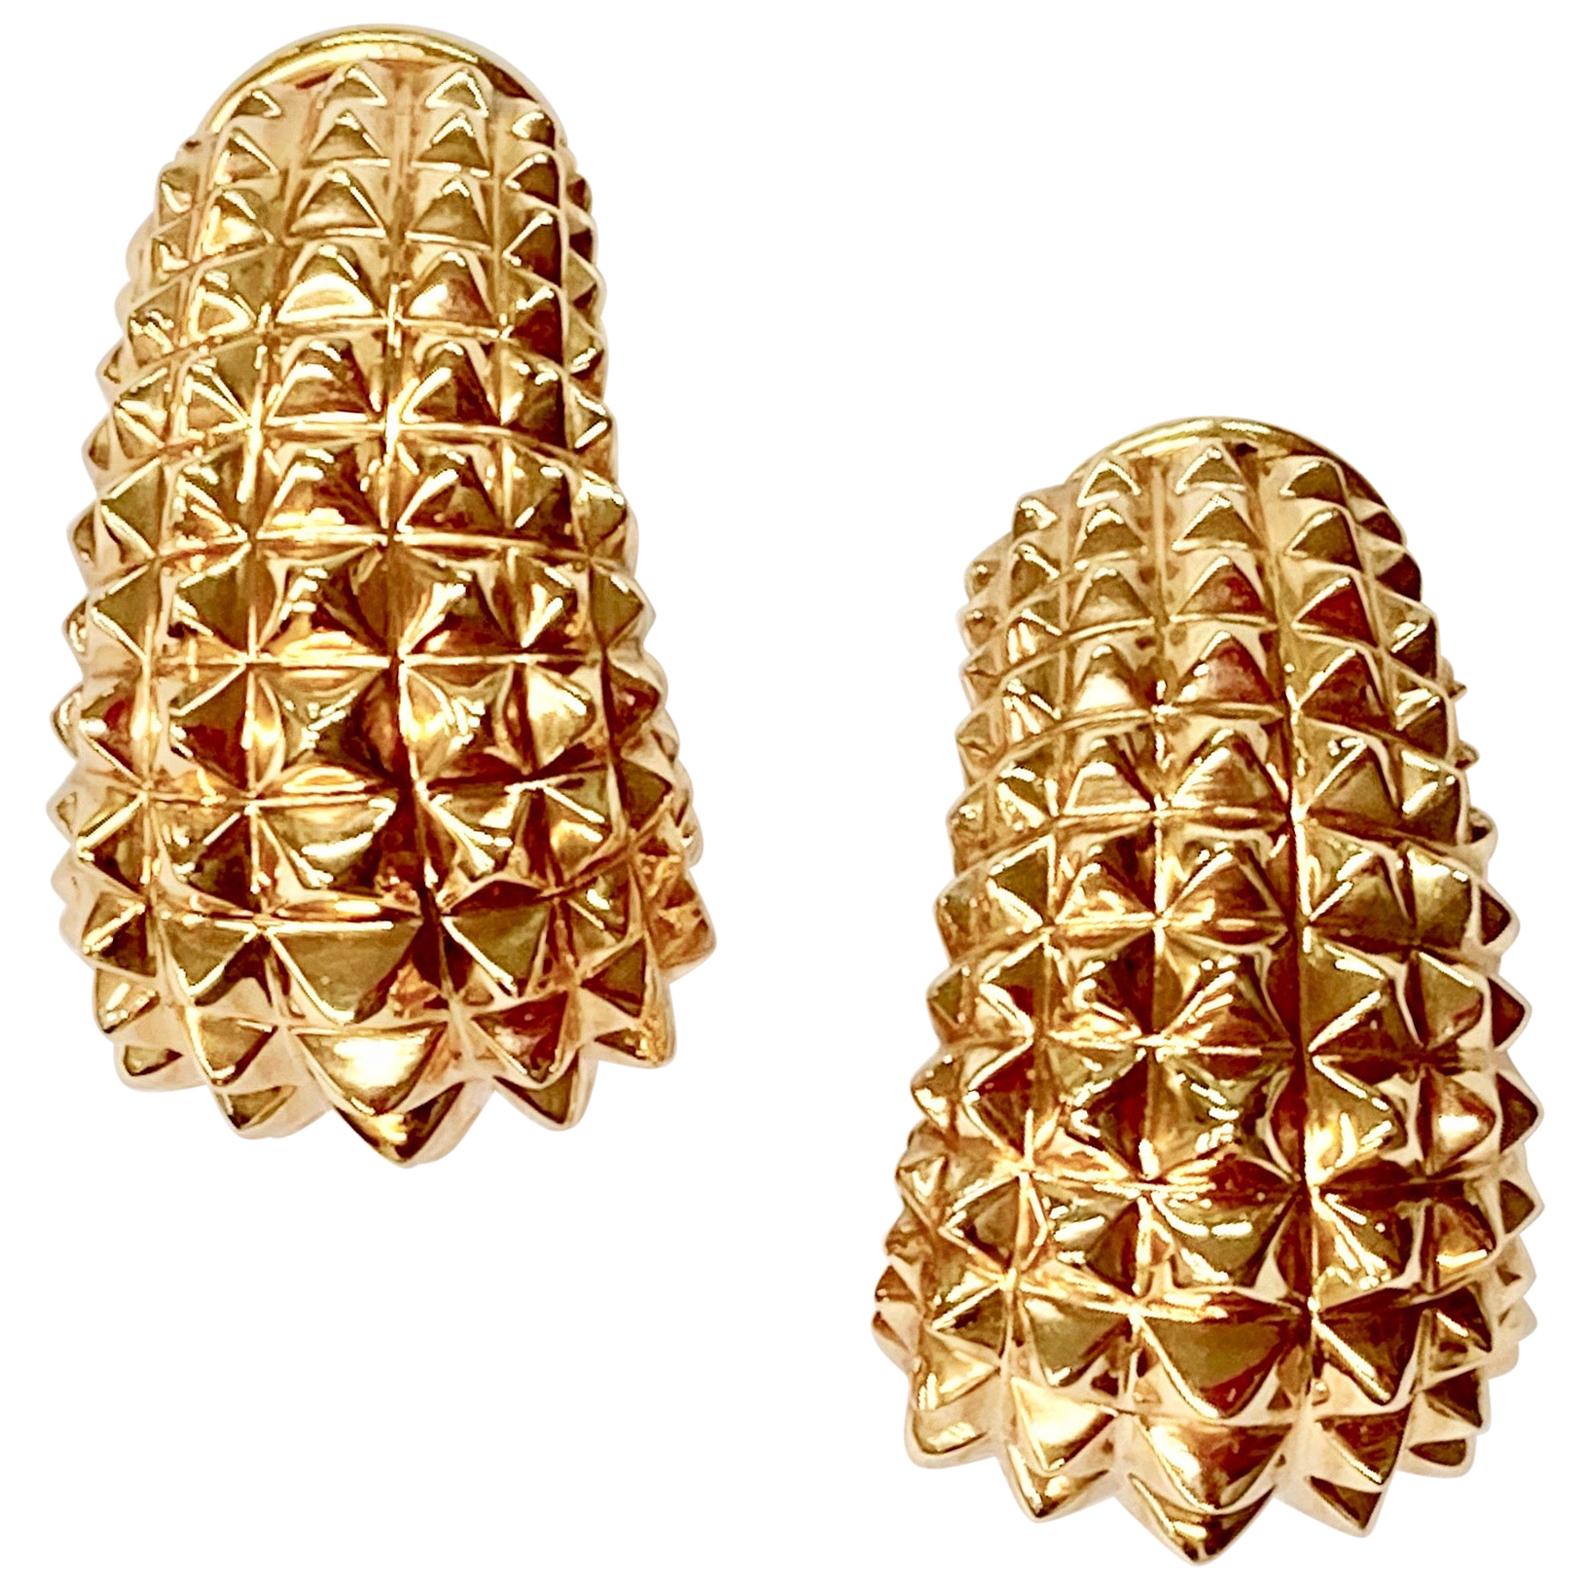 Extravagant 18 Karat Rose Gold Pyramid Motiv Clip-On Earrings by Sueños Zurich For Sale